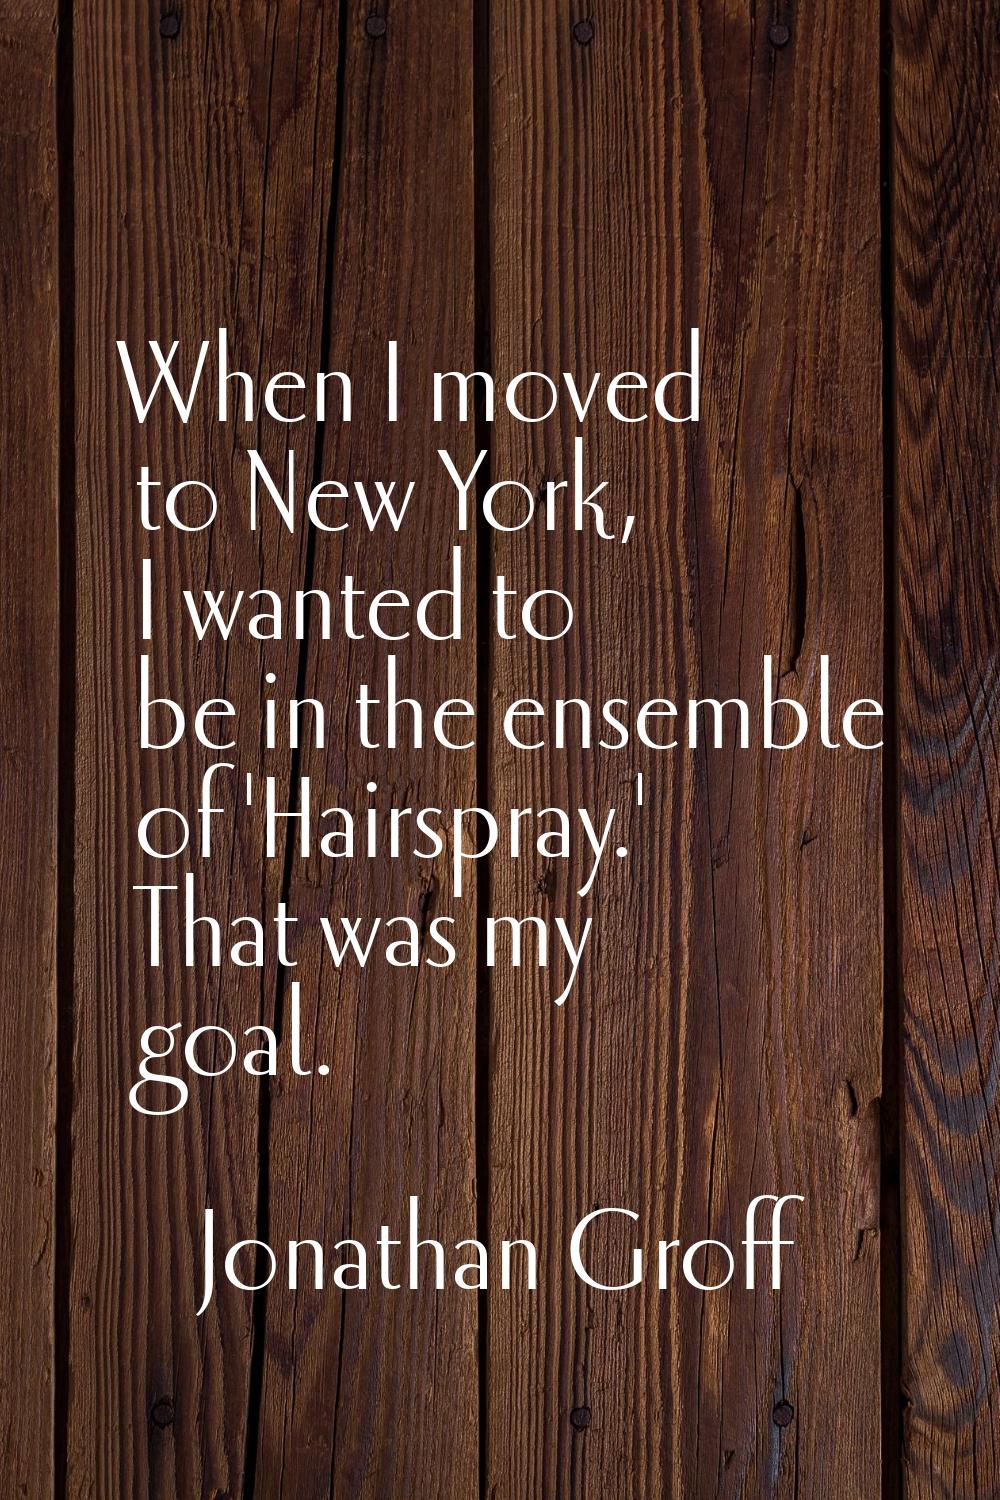 When I moved to New York, I wanted to be in the ensemble of 'Hairspray.' That was my goal.